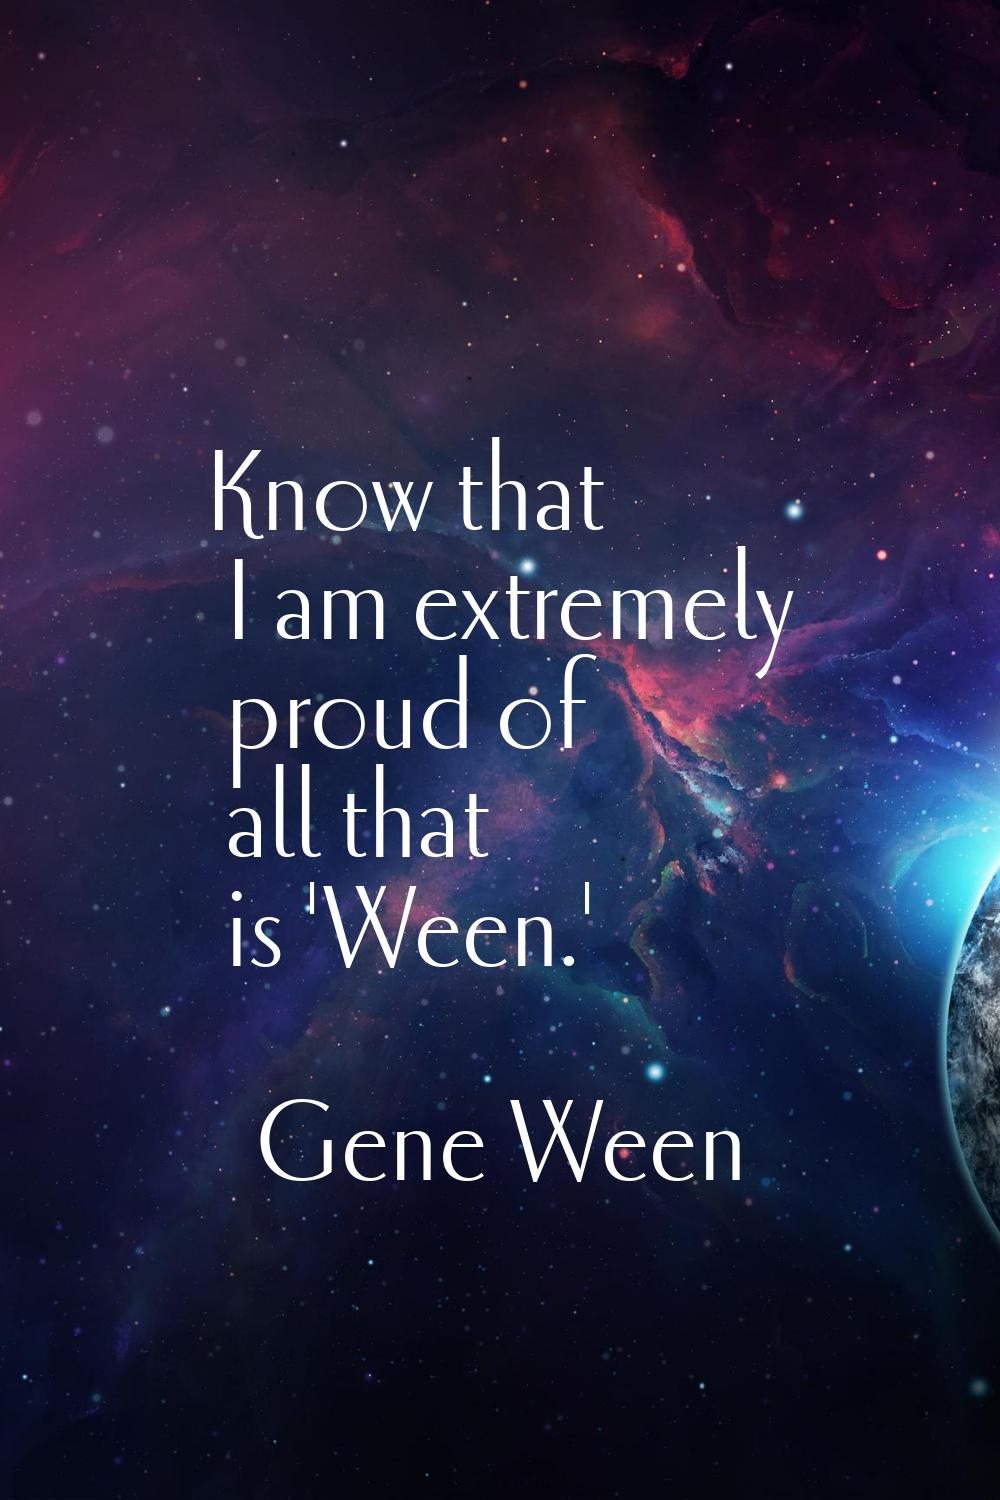 Know that I am extremely proud of all that is 'Ween.'